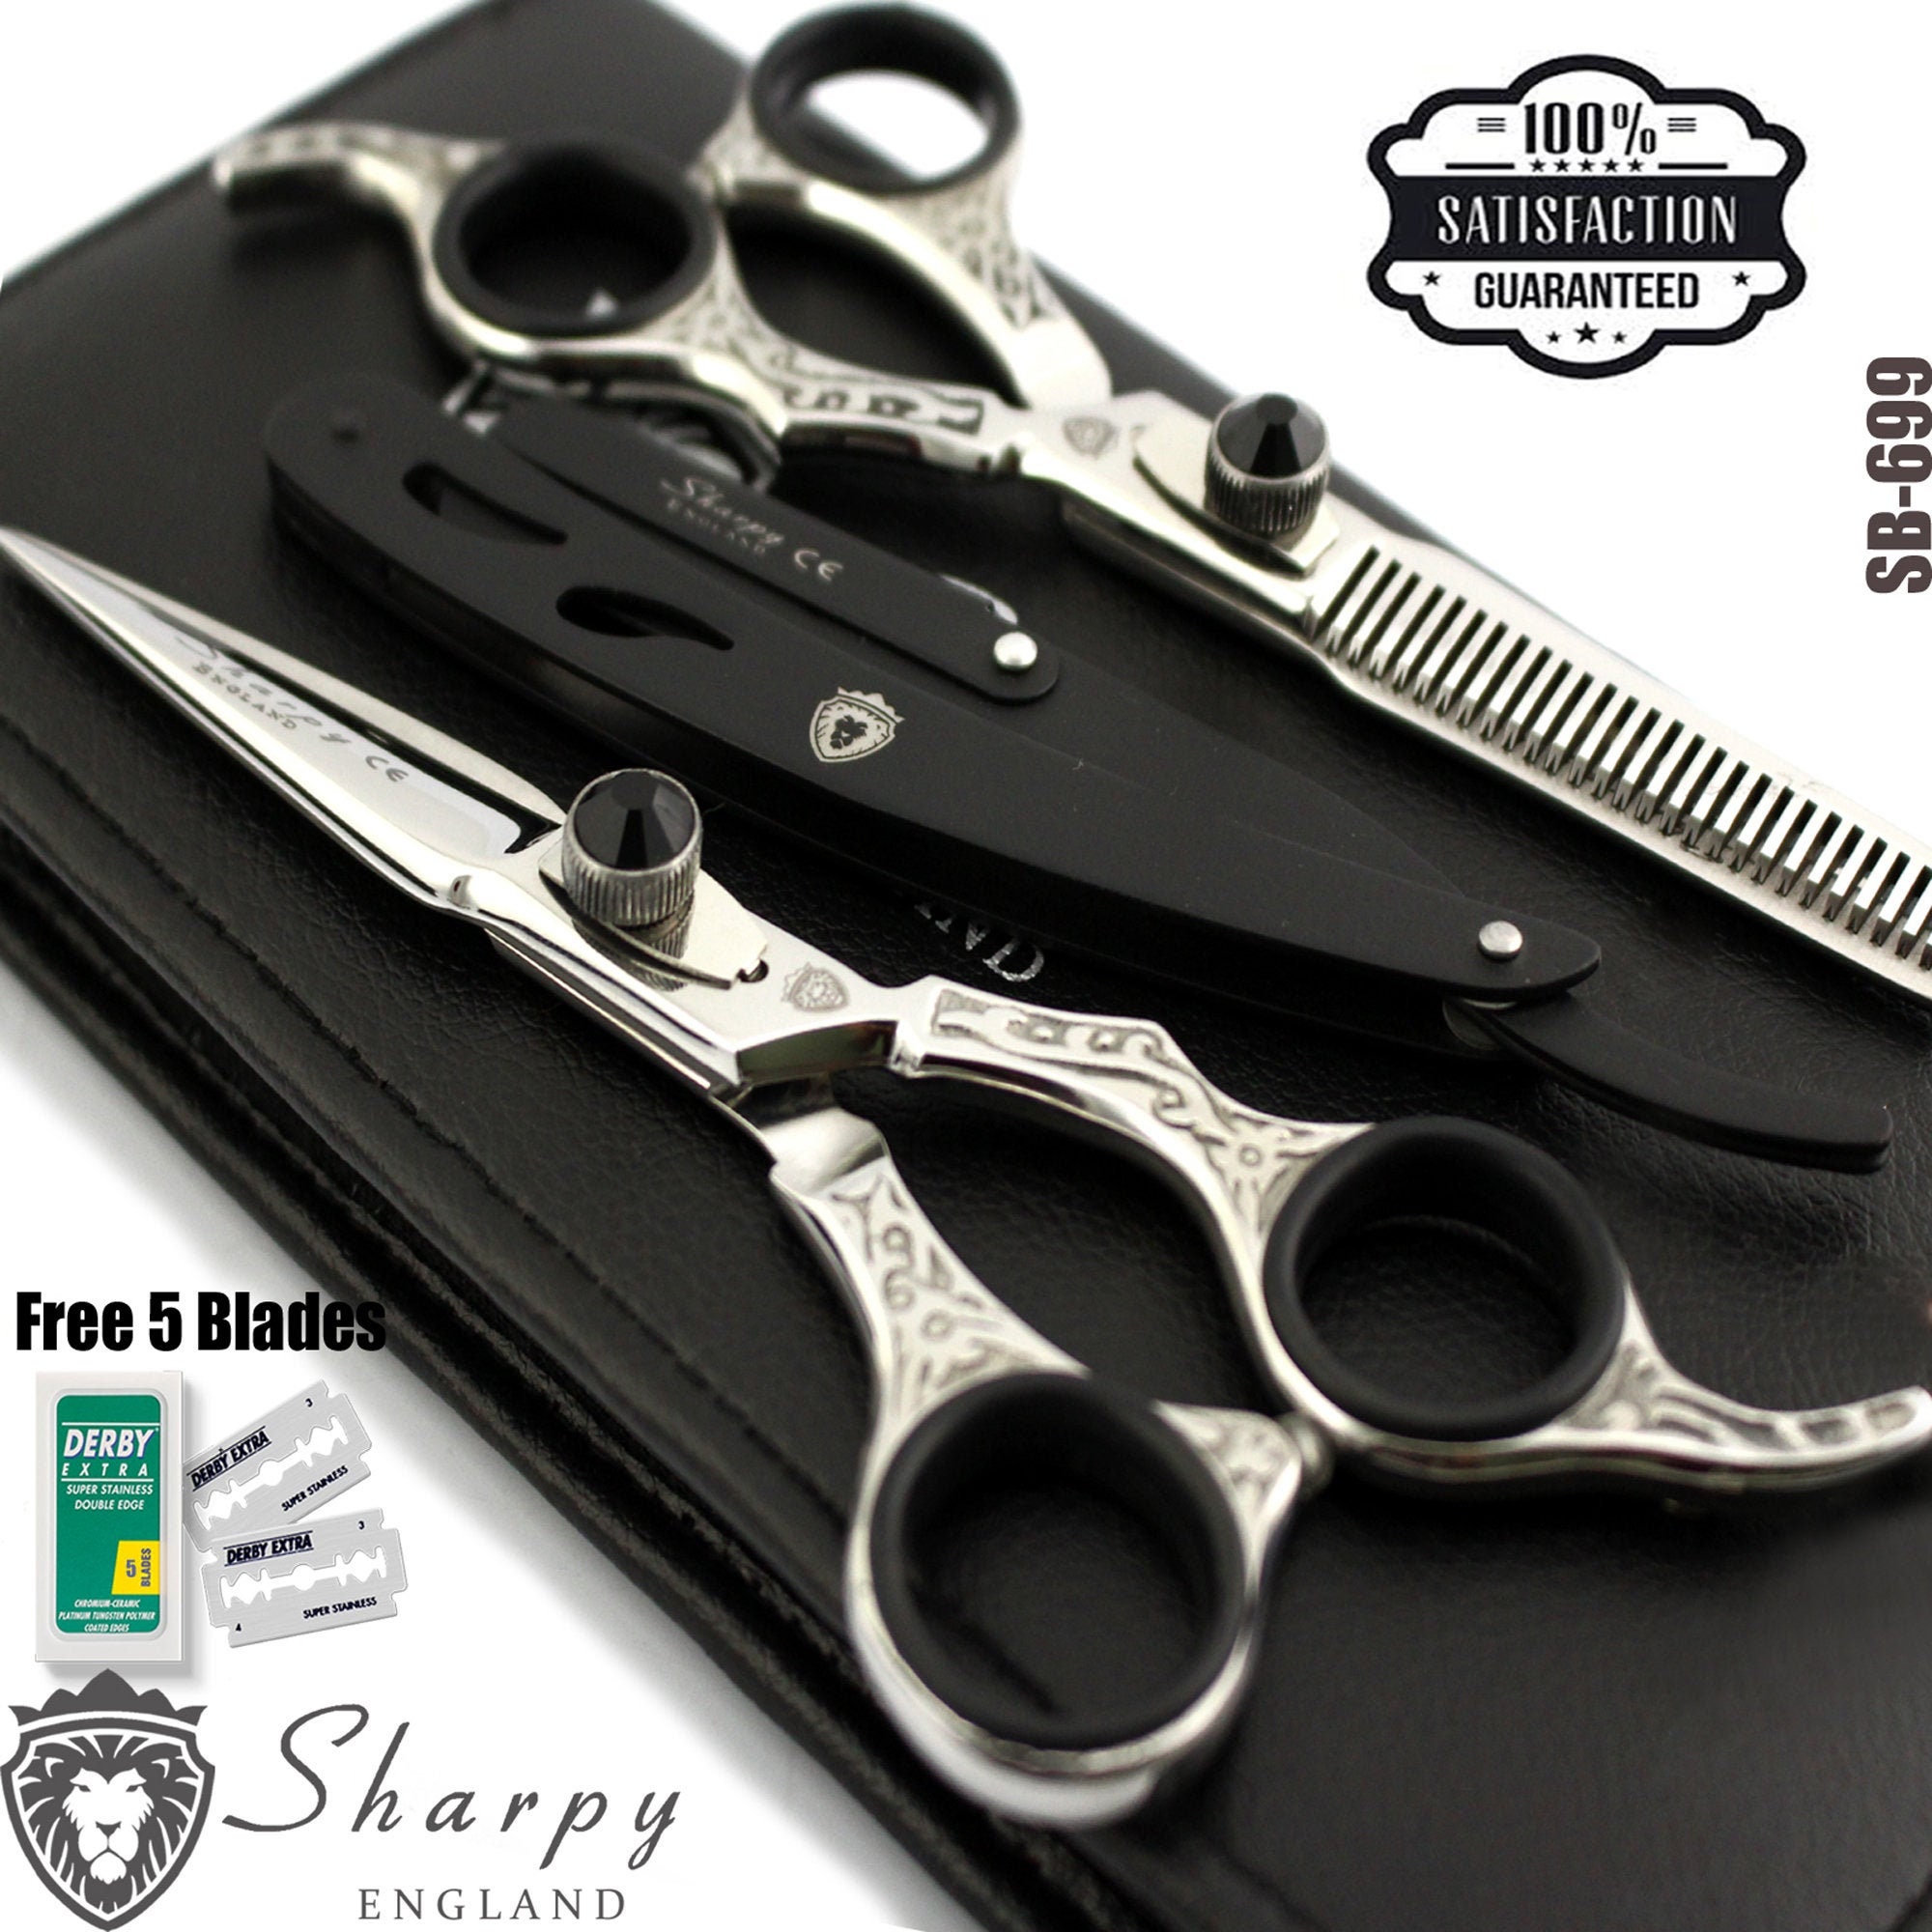 5.25 inches Professional Barber Razor Edge Hair Cutting Scissors/Shears  Adjustment Tension Screw - Mustache/Beard Trimming Hairdressing Cutting